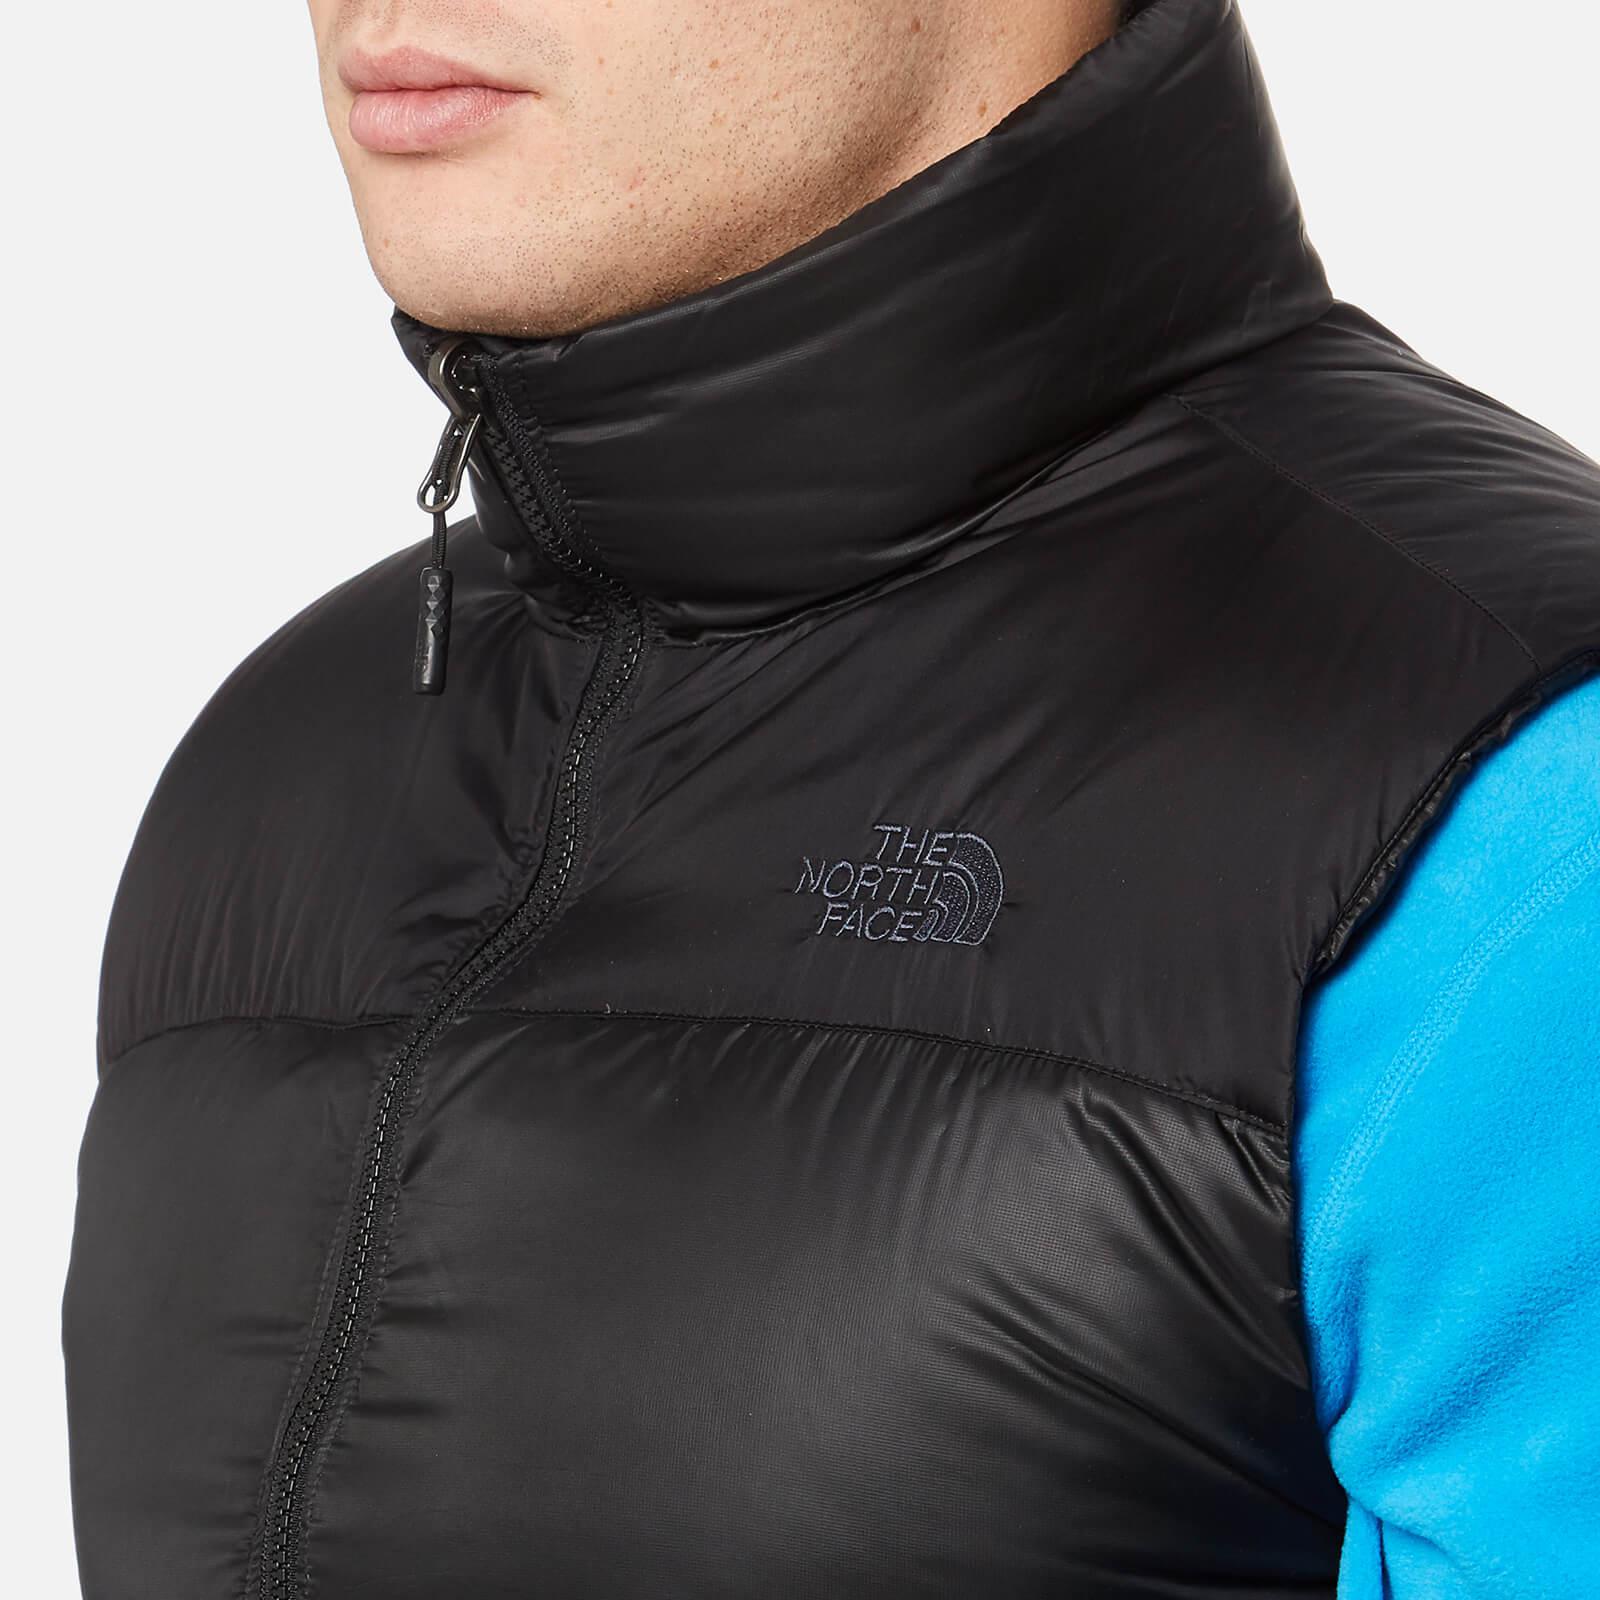 The North Face Goose Nuptse Iii Vest in Black for Men - Lyst